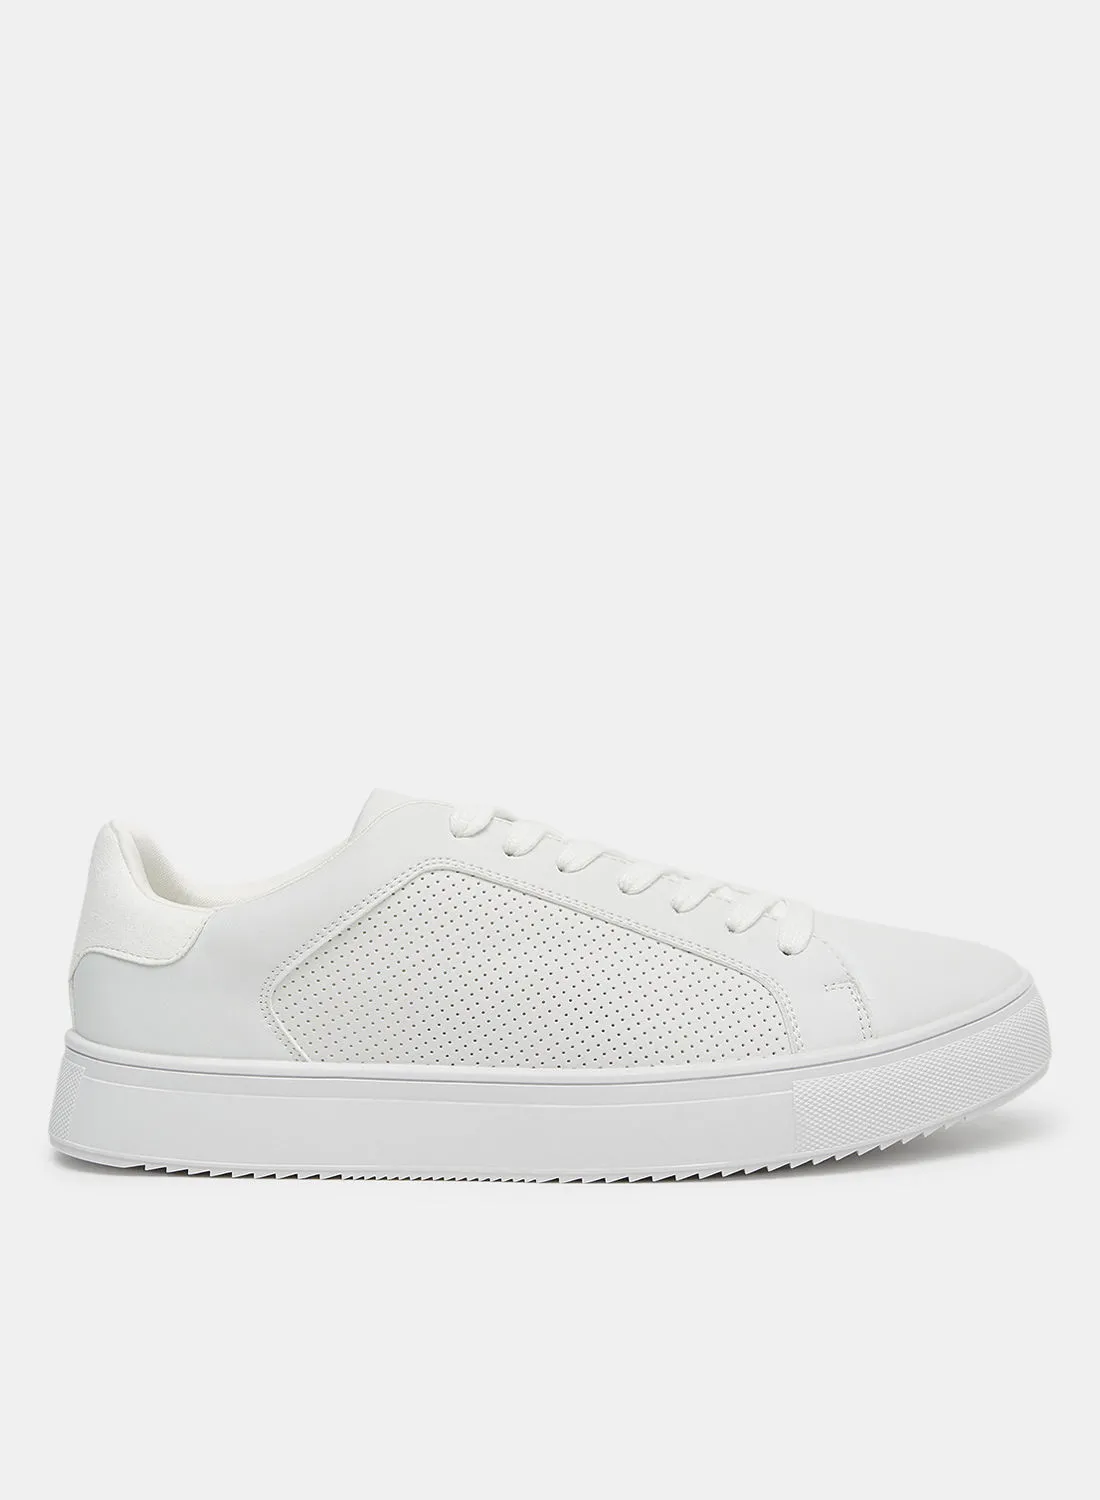 CALL IT SPRING Augussta Low Top Sneakers